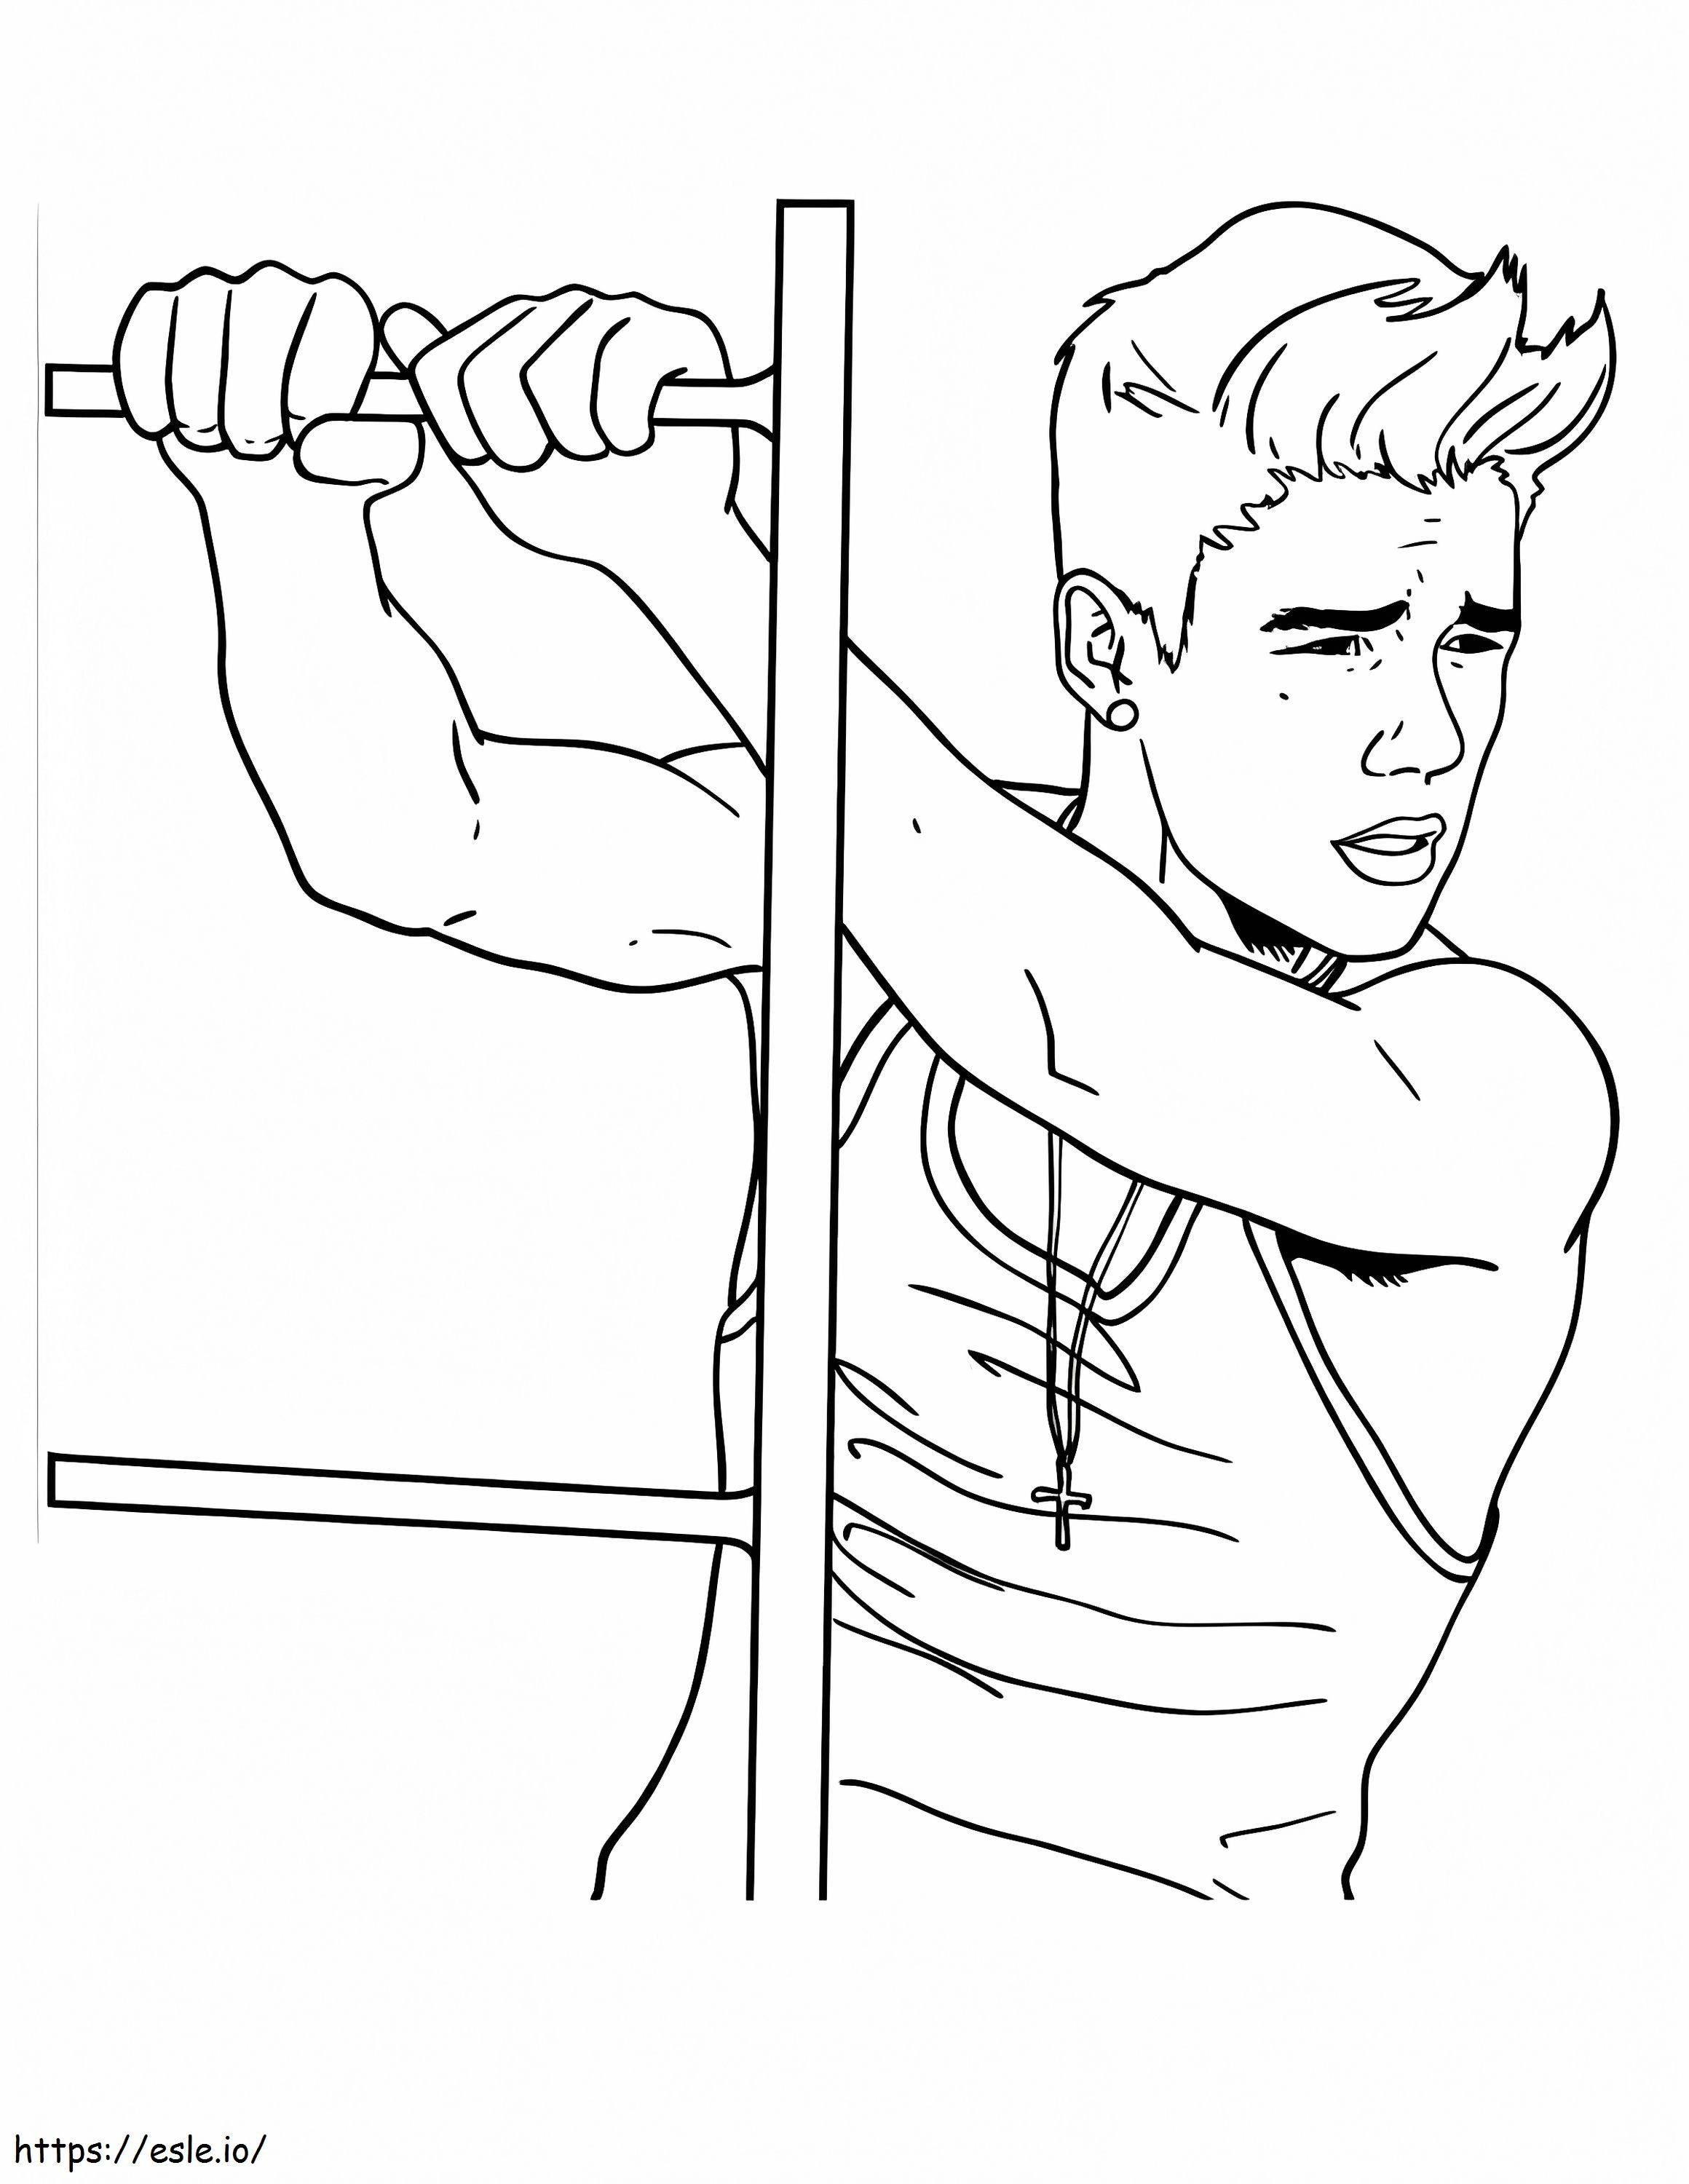 Justin Bieber Goes To The Gym coloring page